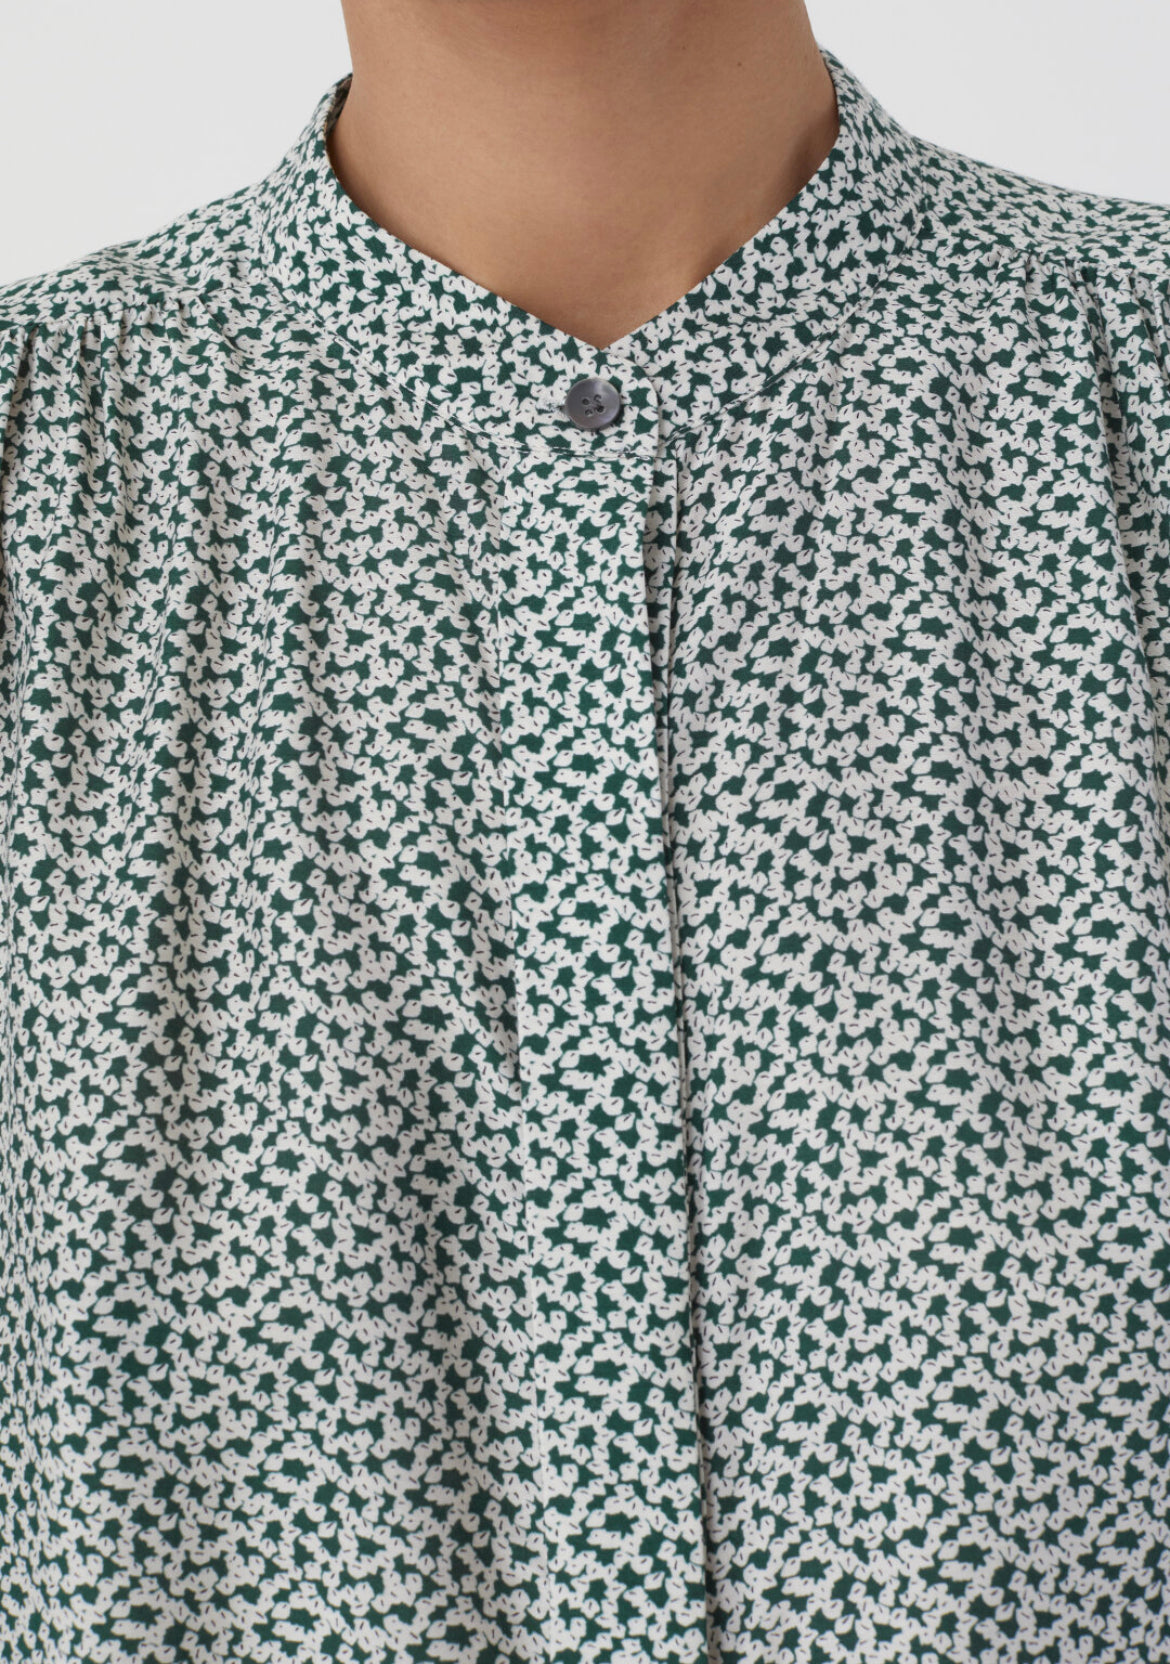 CLOSED Printed Blouse in Fern